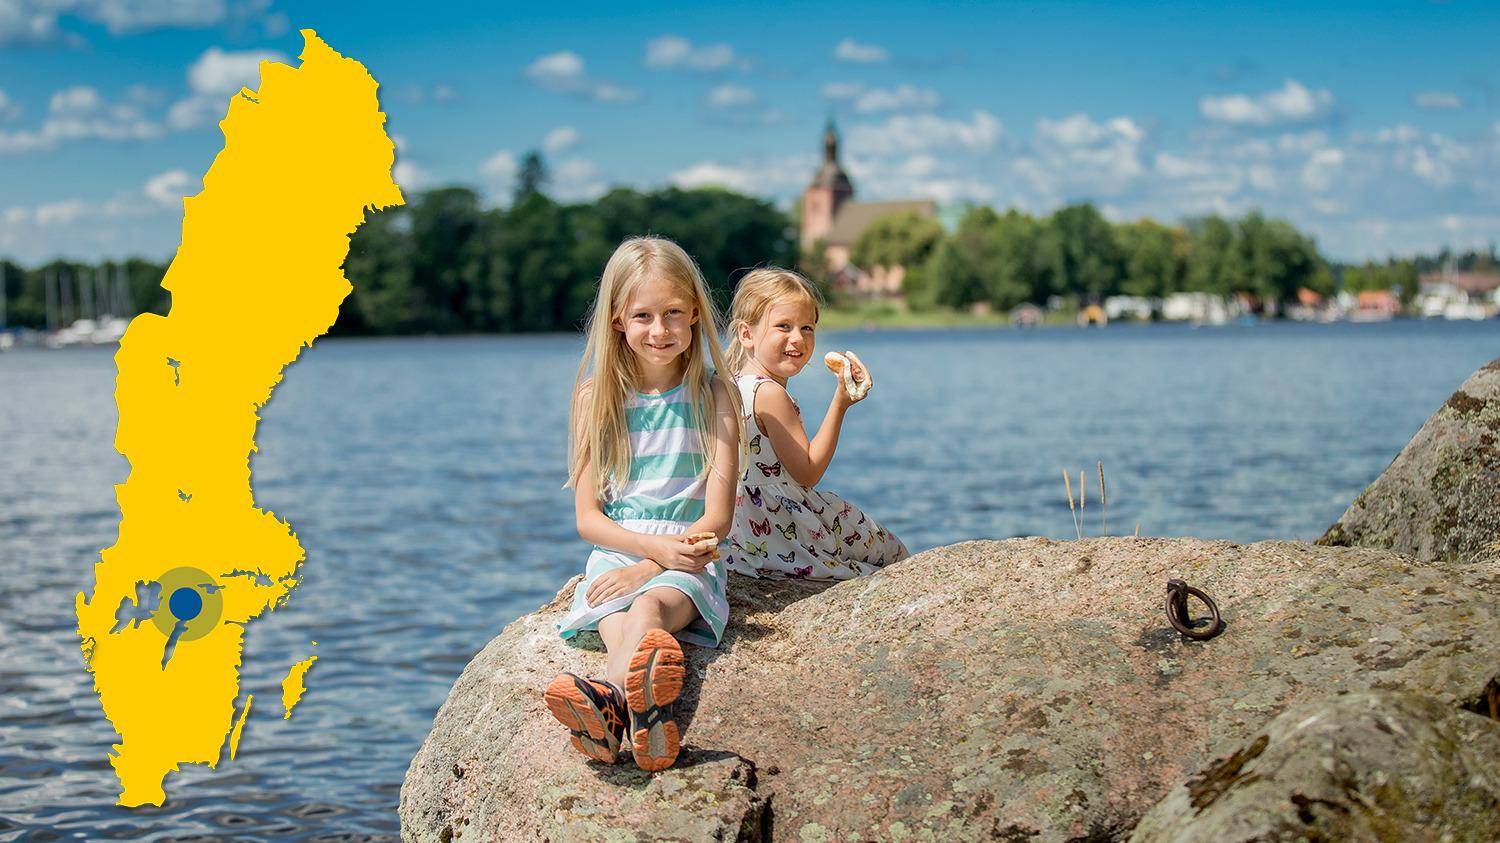 Two children, girls, sits on a cliff next to the water during summer. A yellow map of Sweden with a marker showing the location of Askersund.